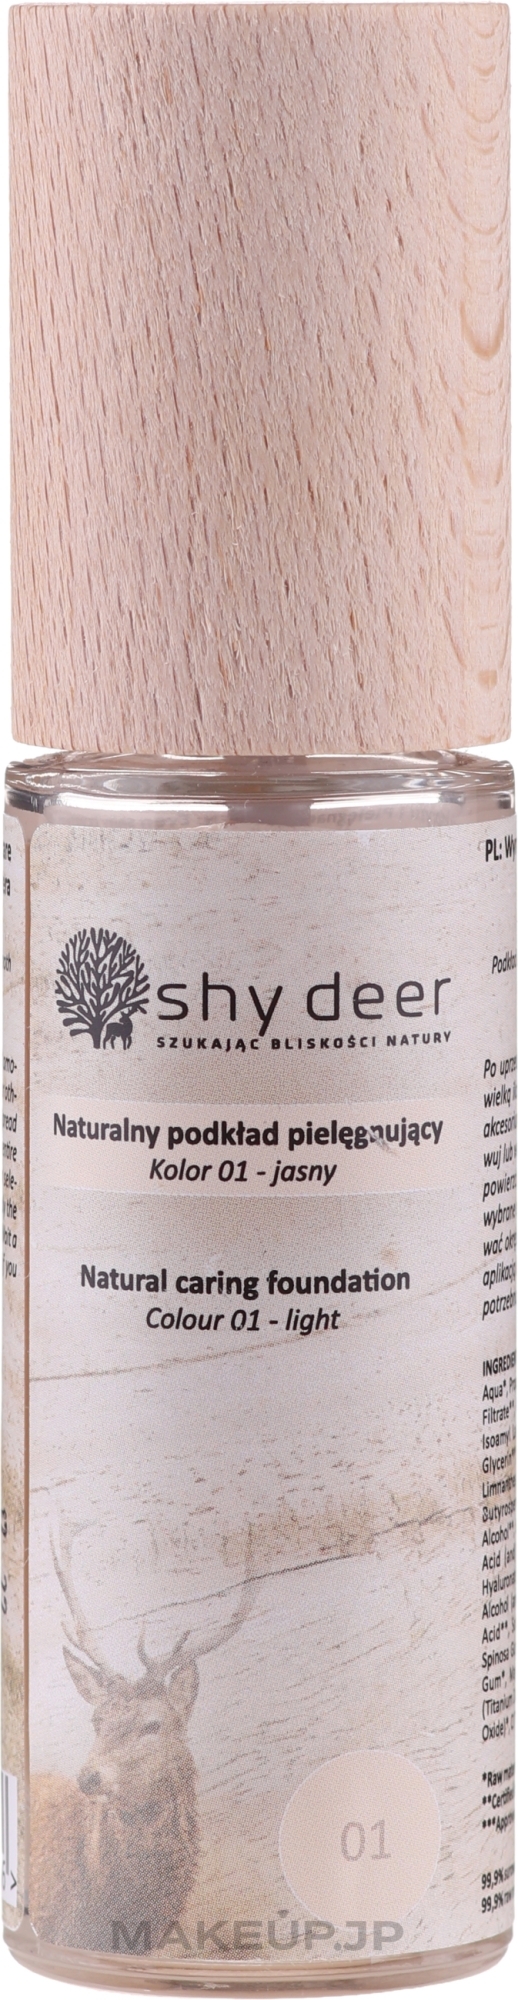 Face Foundation - Shy Deer Natural Caring Foundation — photo 01 - Light